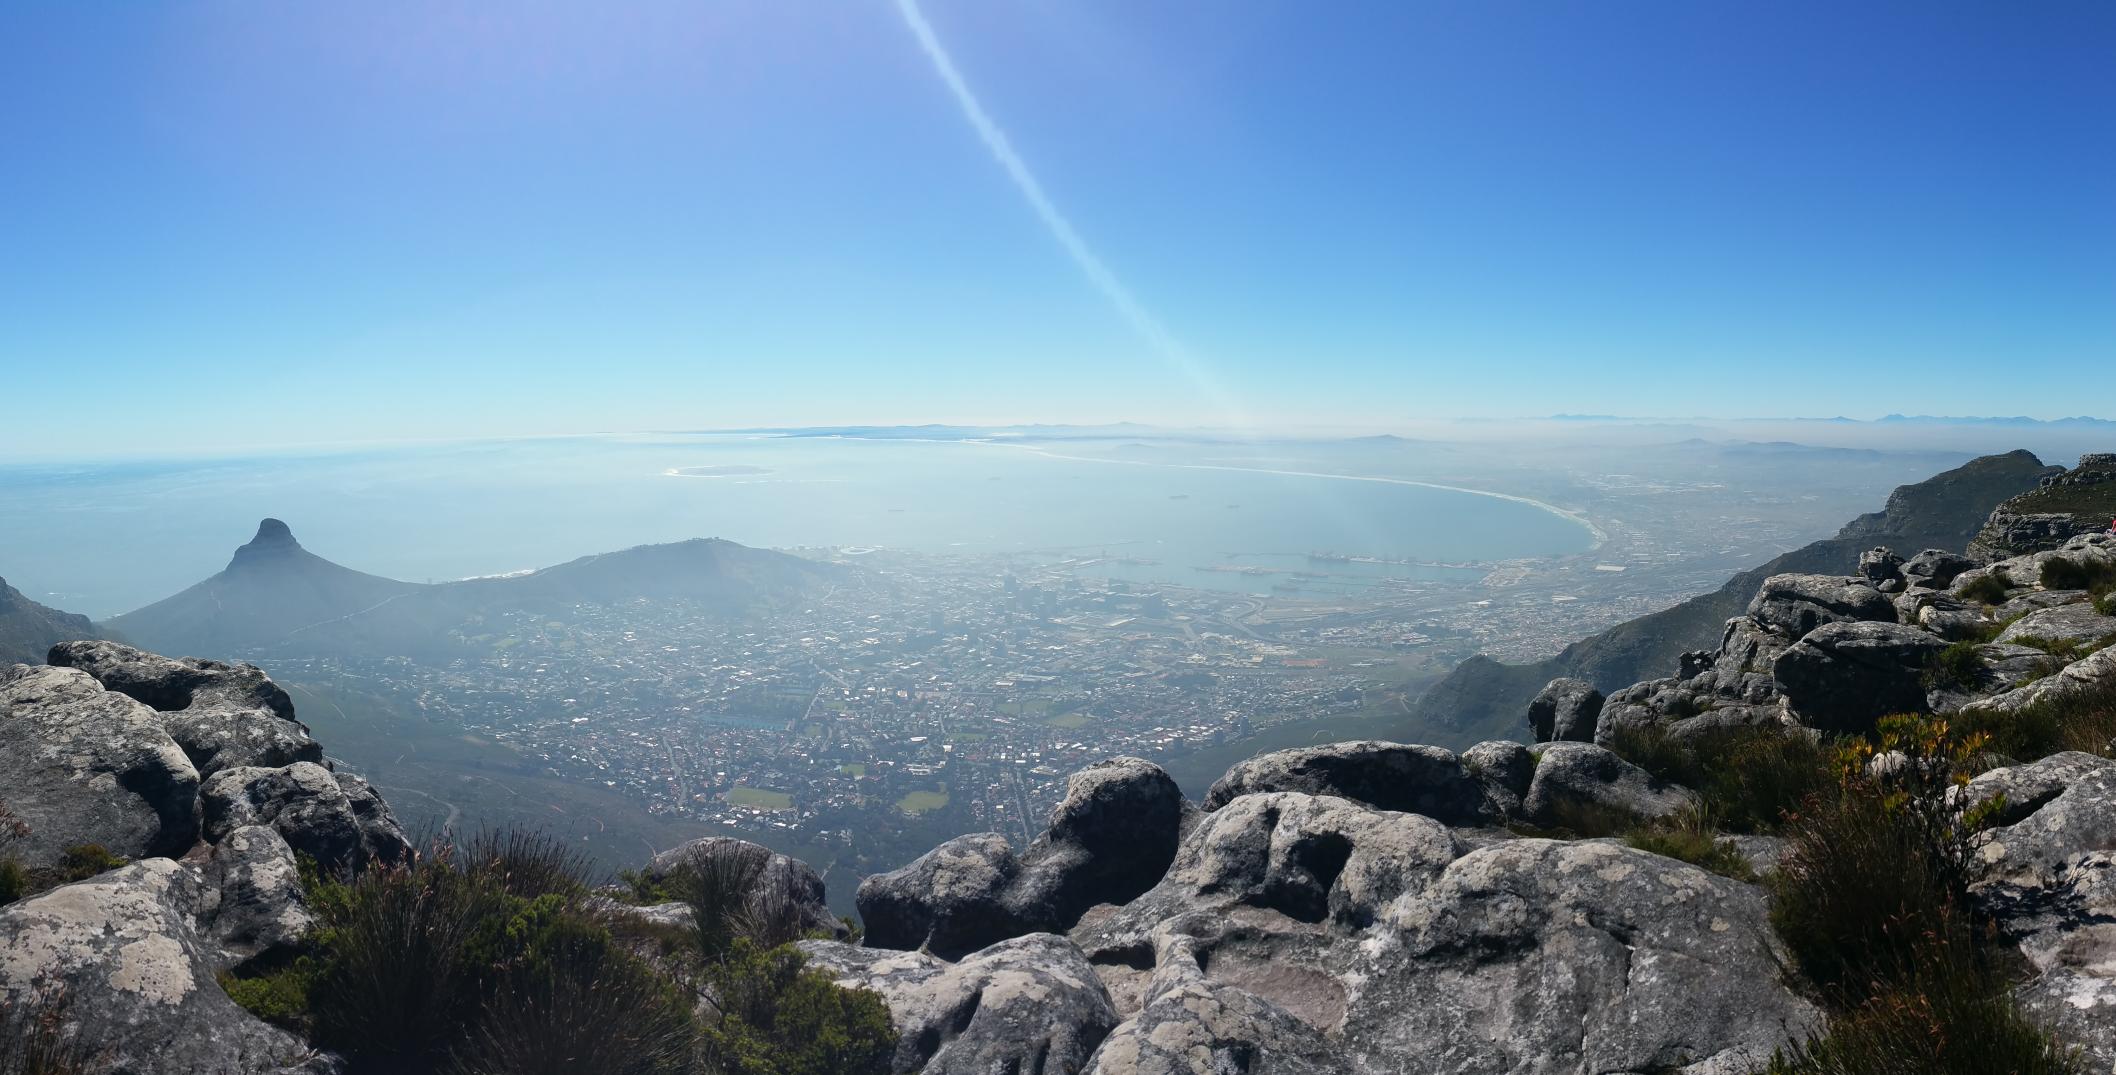 Panoramic image of Cape Town, South Africa